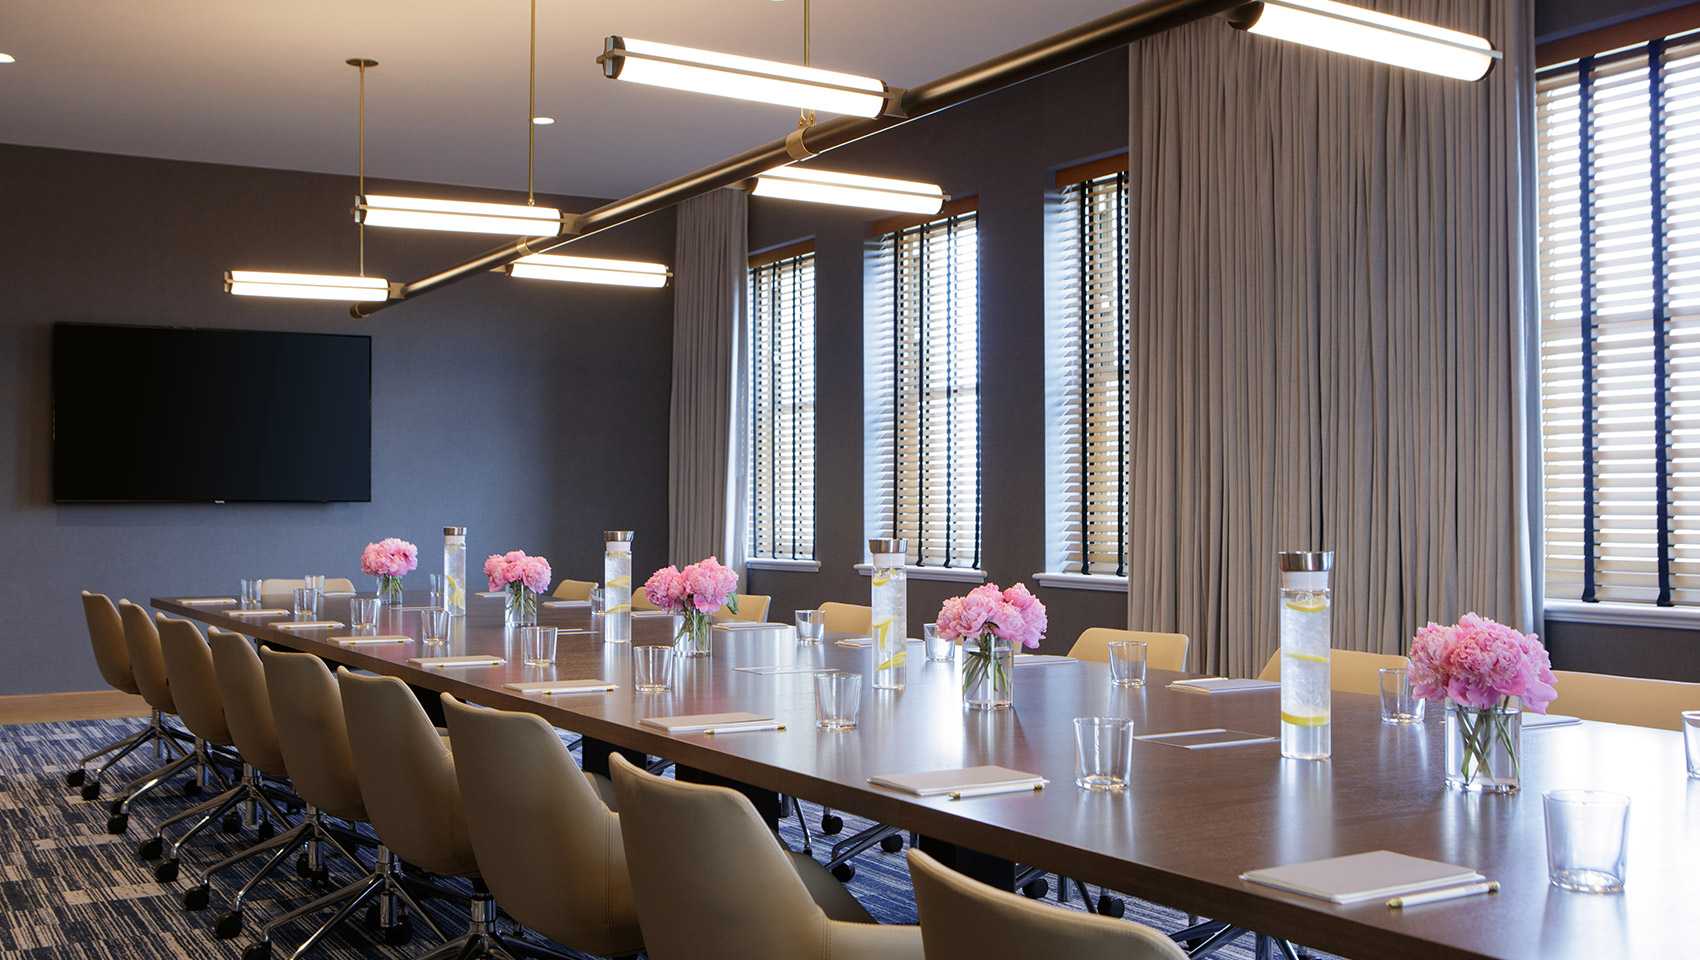 Sanguinet boardroom meeting and event space on our penthouse level